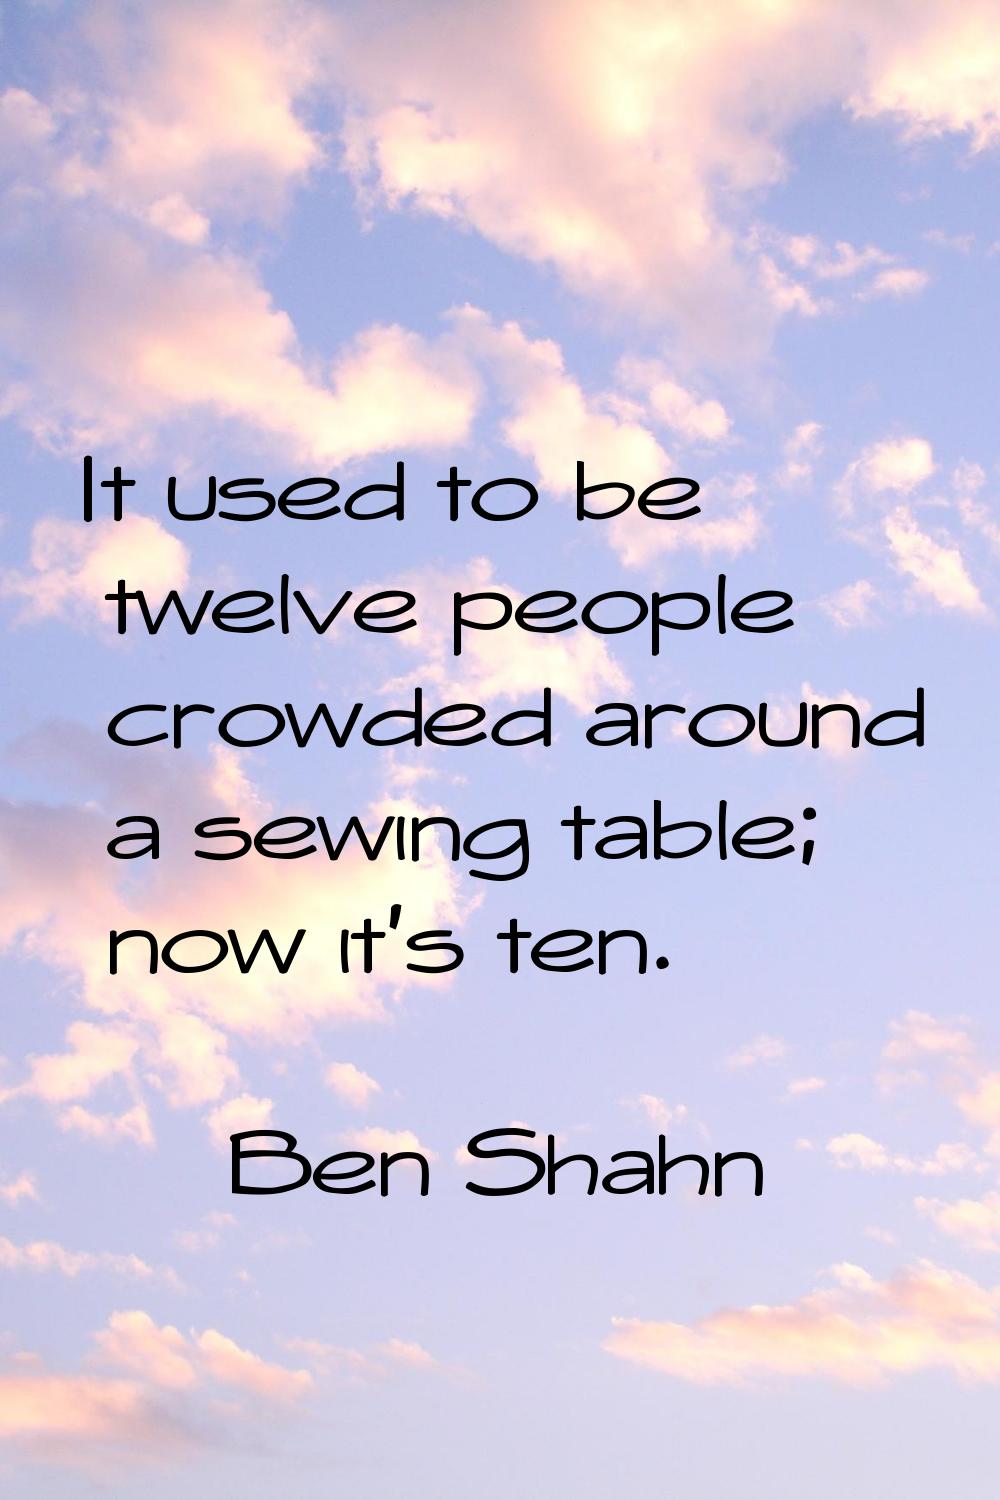 It used to be twelve people crowded around a sewing table; now it's ten.